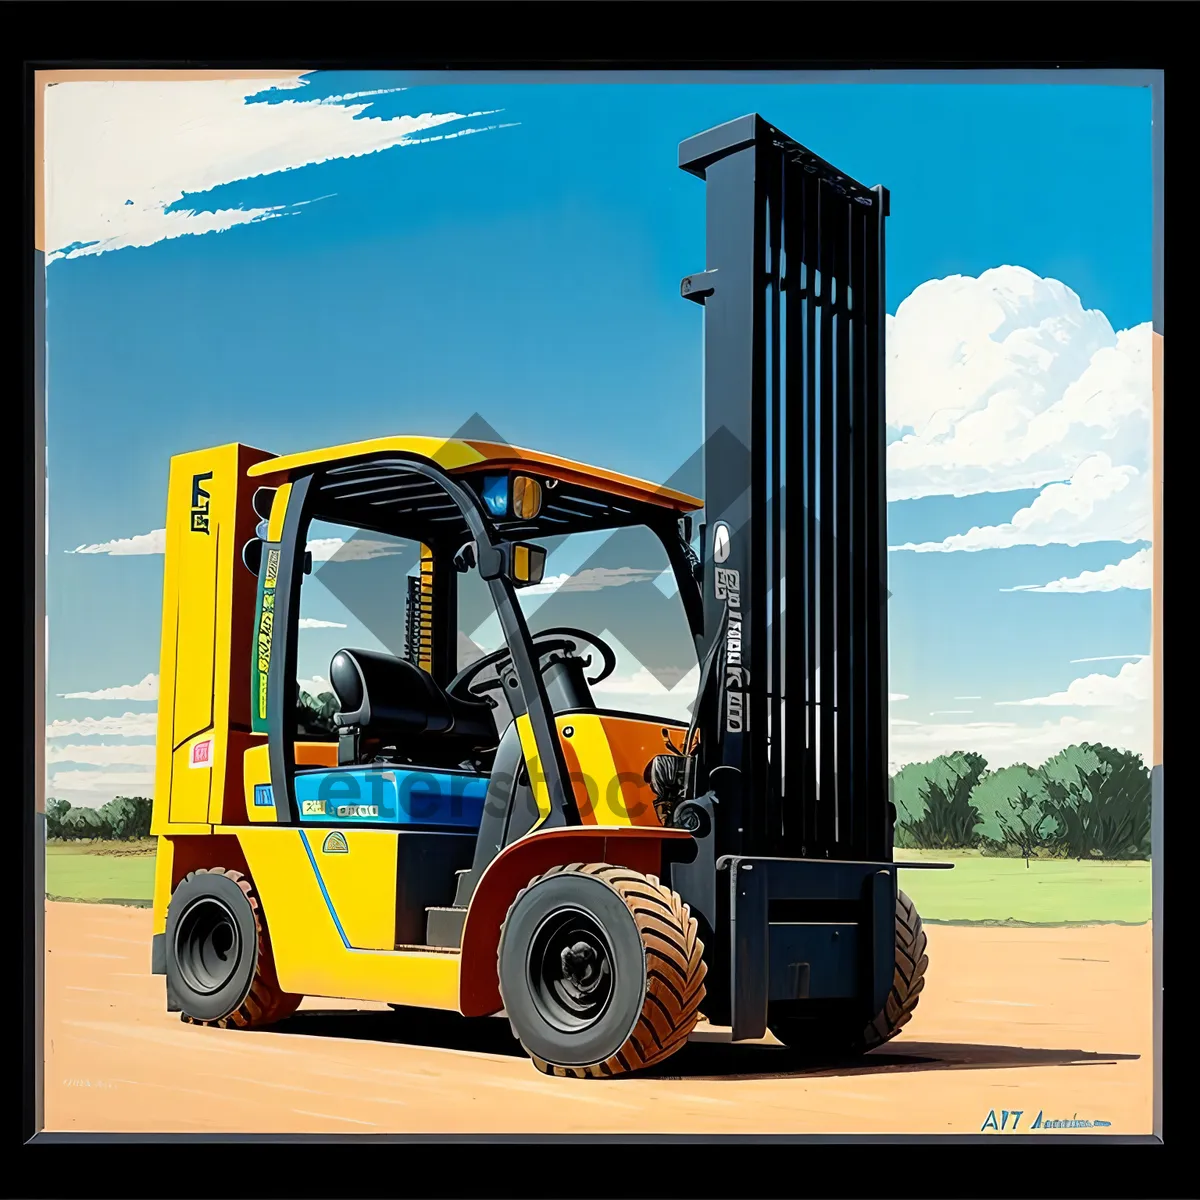 Picture of Powerful Yellow Forklift Loader at Industrial Site